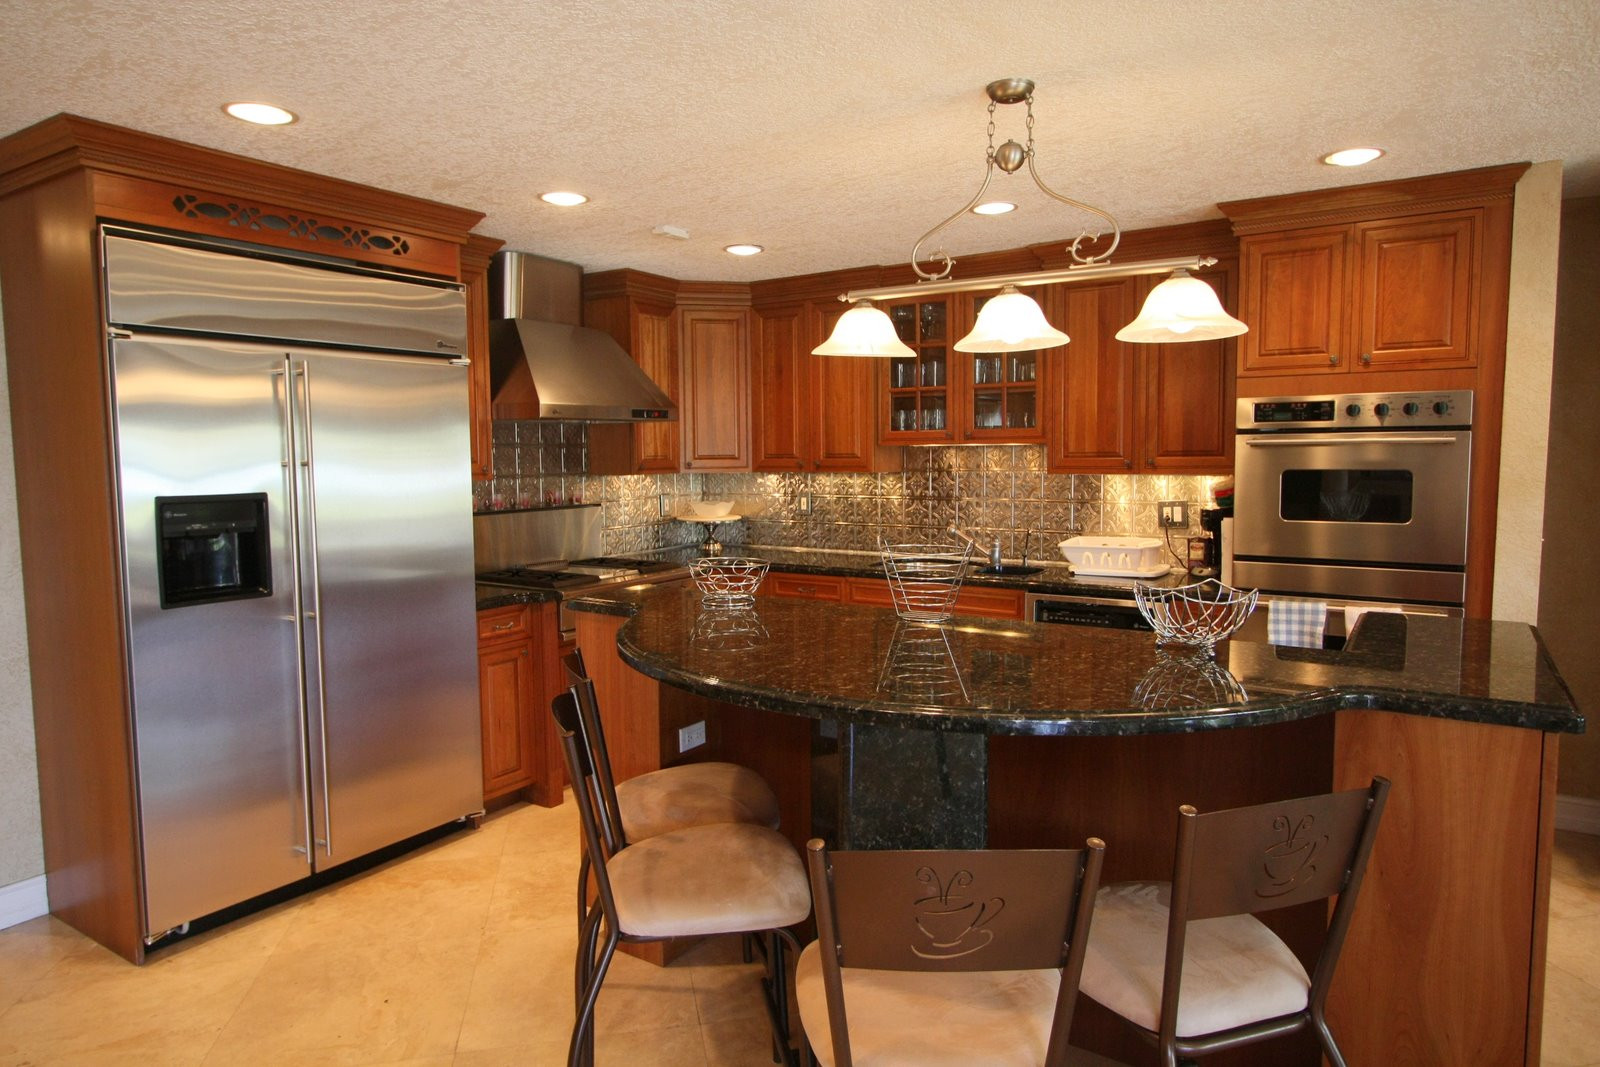 Kitchen Remodel Ideas Images
 Kitchen Remodeling Ideas & s